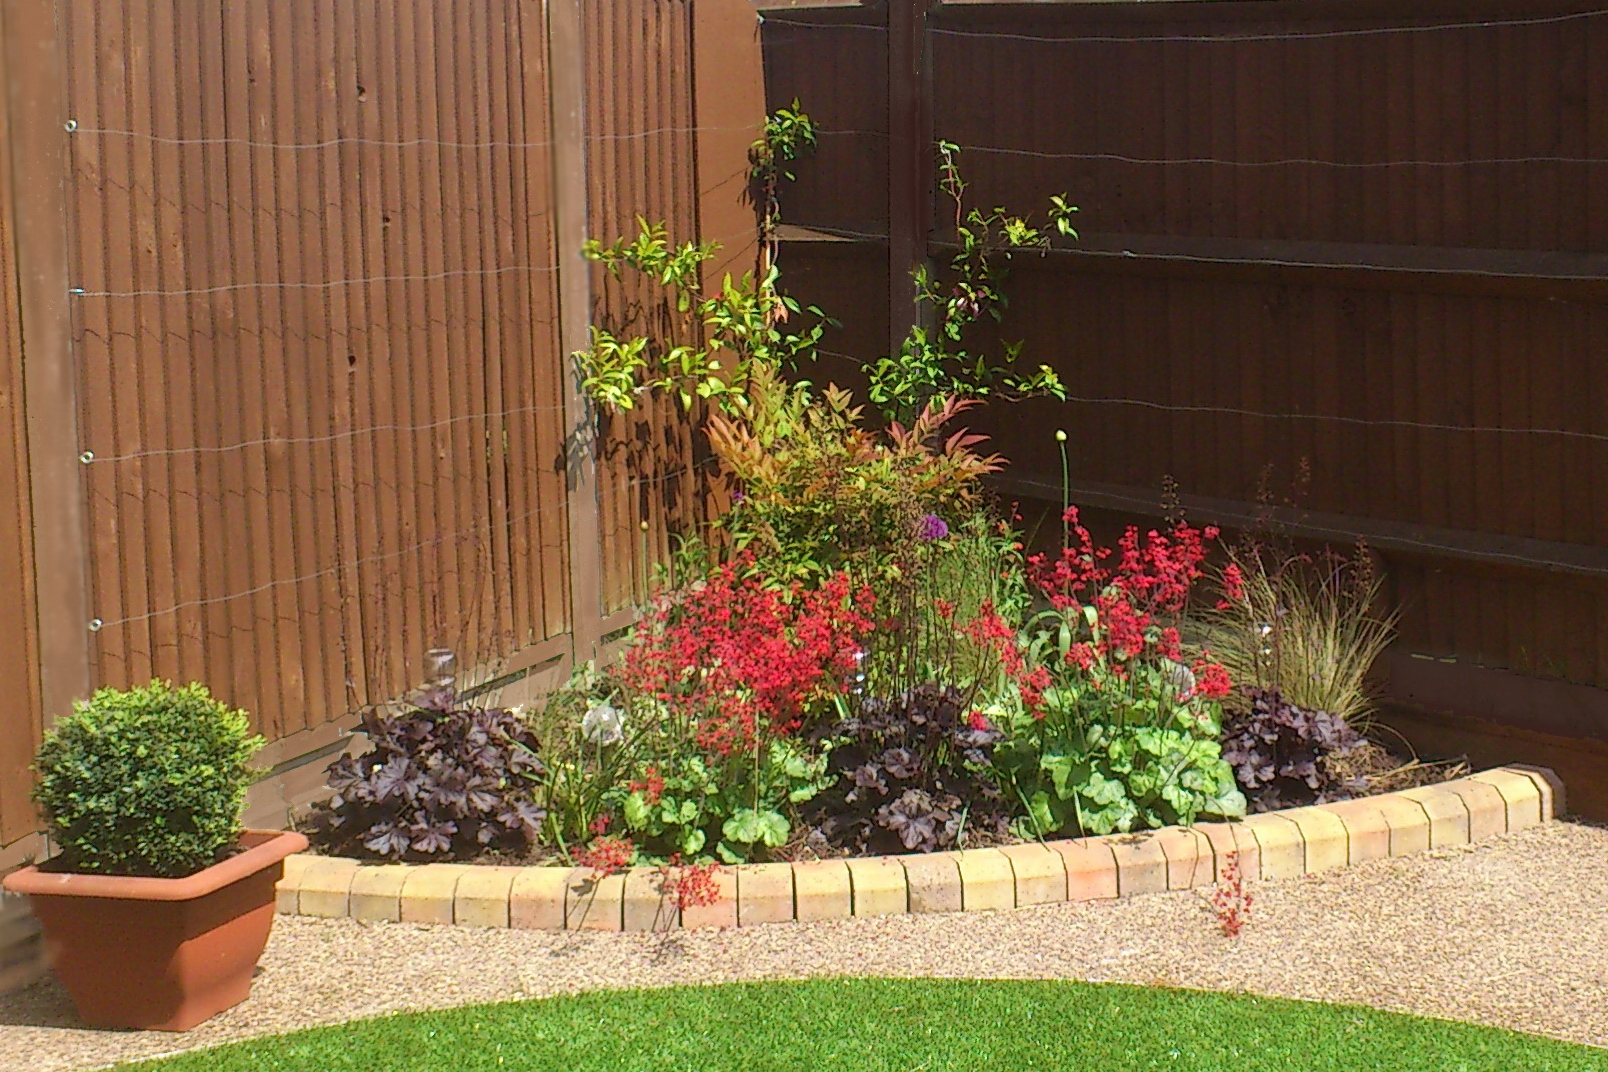 Garden planting design for Northolt. Rhoda Maw Garden Design painted the fence posts and added fabulous colour to this tiny border